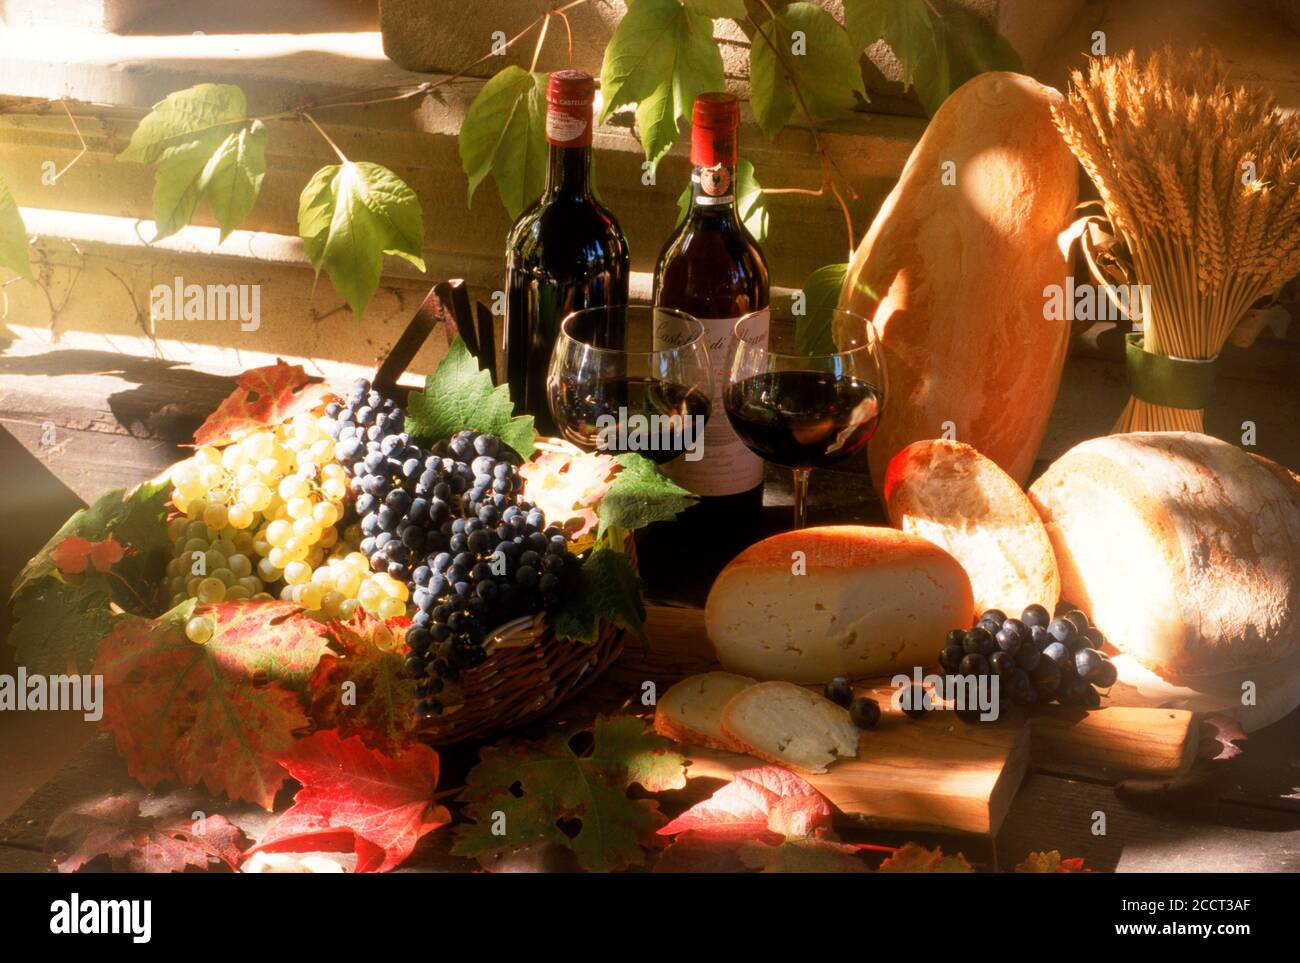 Bottles of Chianti wine with grapes bread and cheese and wheat stalks at Chateau Uzzano in Tuscany Italy Stock Photo